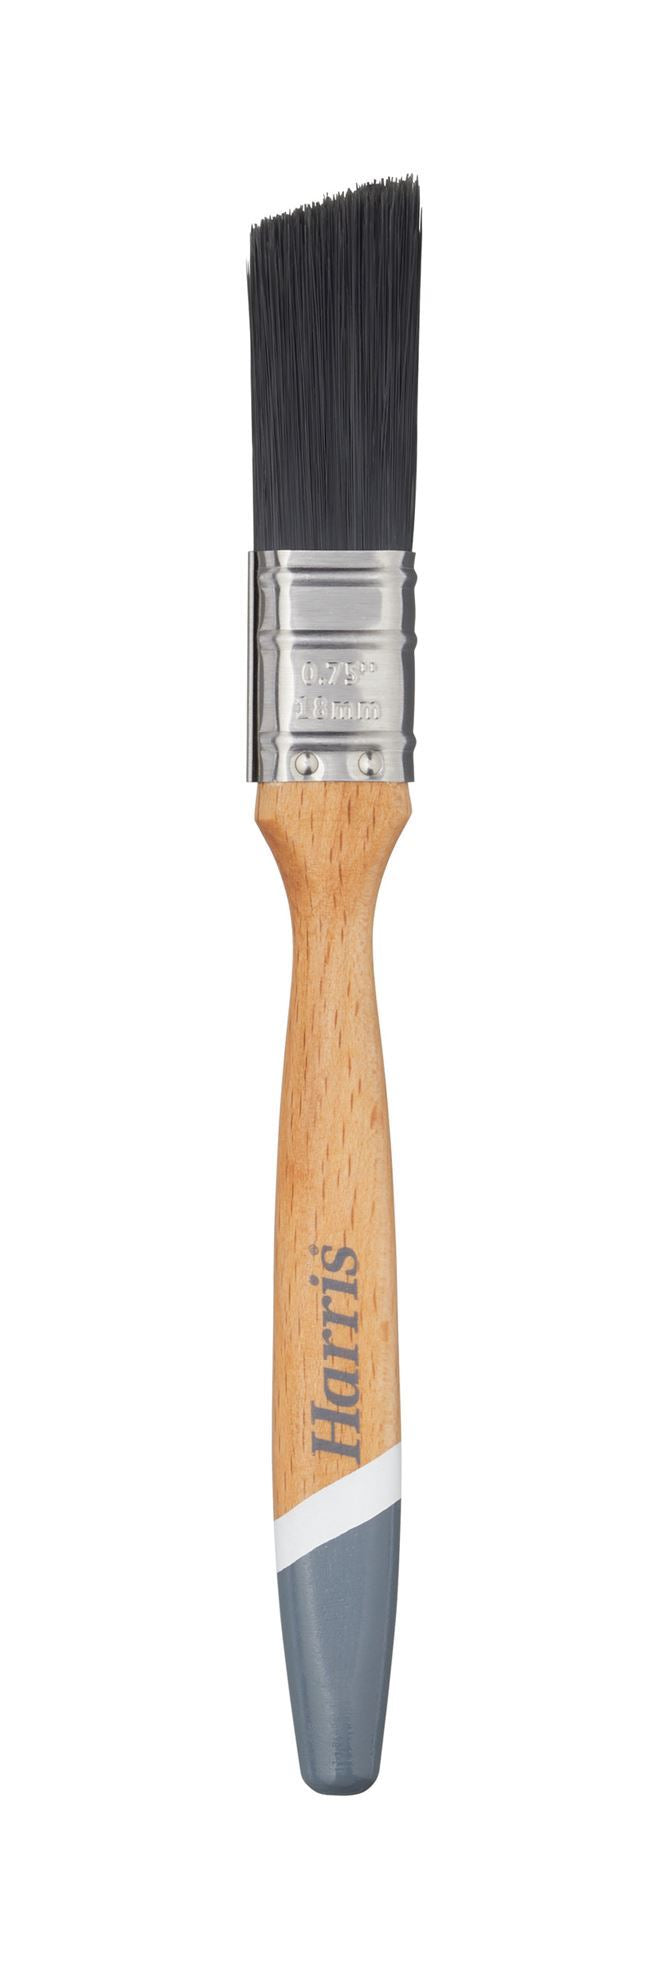 Harris Ultimate Woodwork Gloss Angled Paint Brush 0.75in